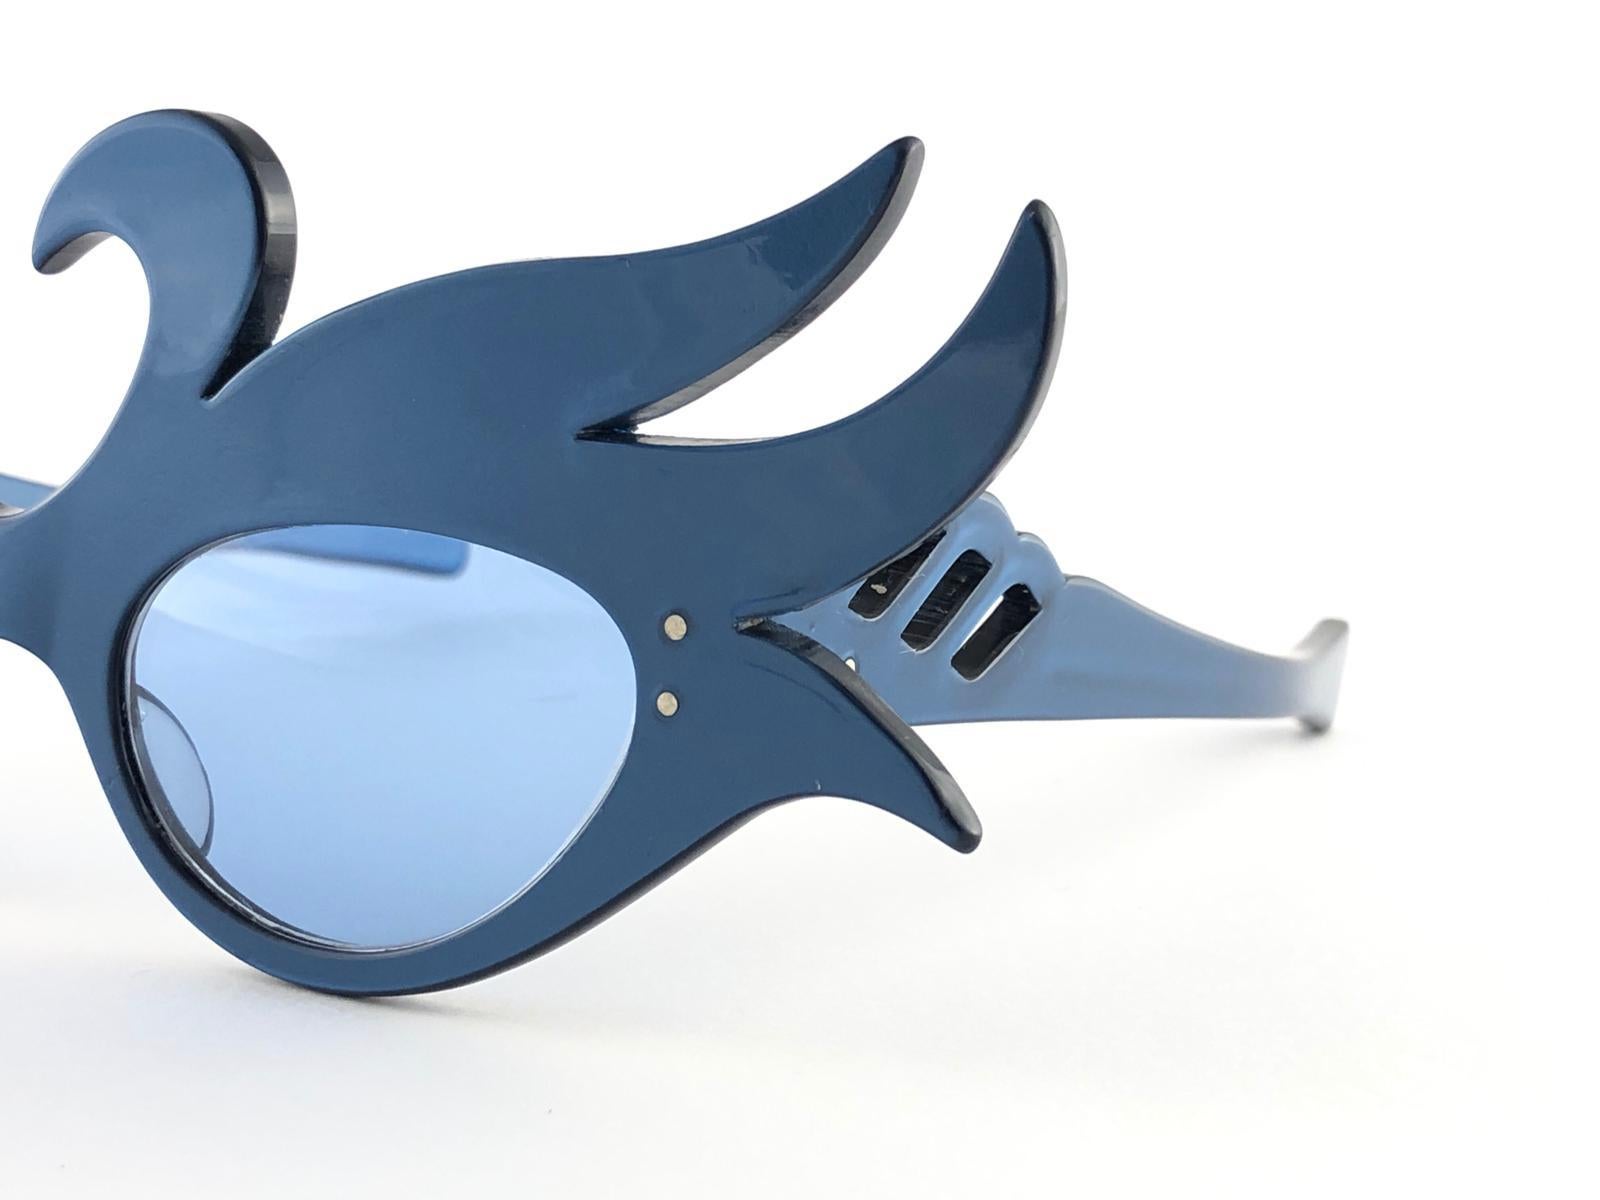 New Vintage Alain Mikli blue swans prototype.

Rare item in new and unworn condition. Spotless smoke grey lenses.

Please consider that this item is nearly 40 years old so it could show minor sign of wear due to storage.

Made in